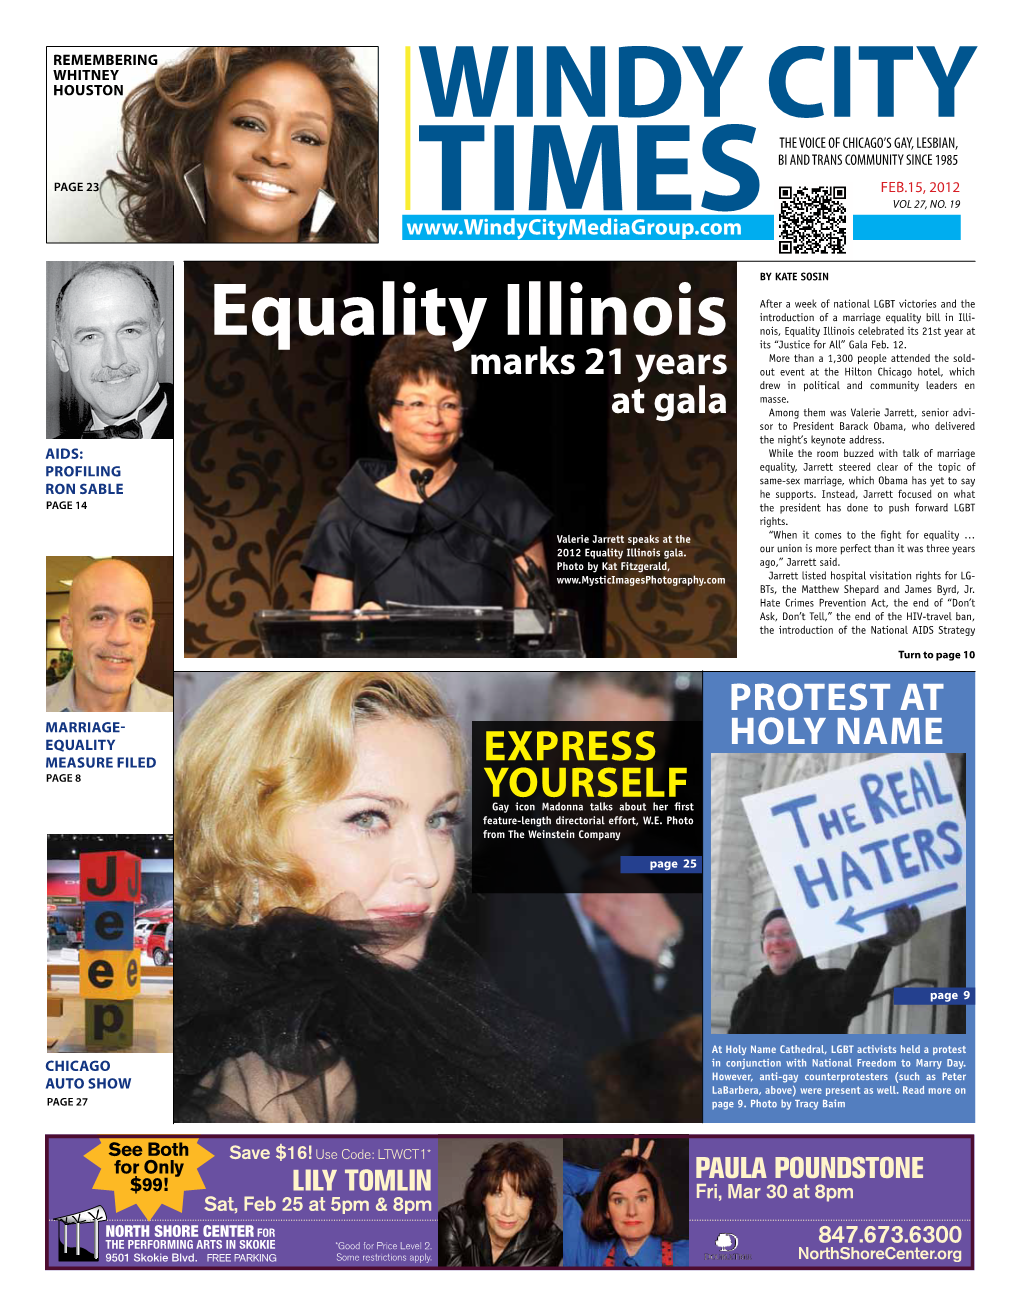 Equality Illinois Celebrated Its 21St Year at Equality Illinois Its “Justice for All” Gala Feb